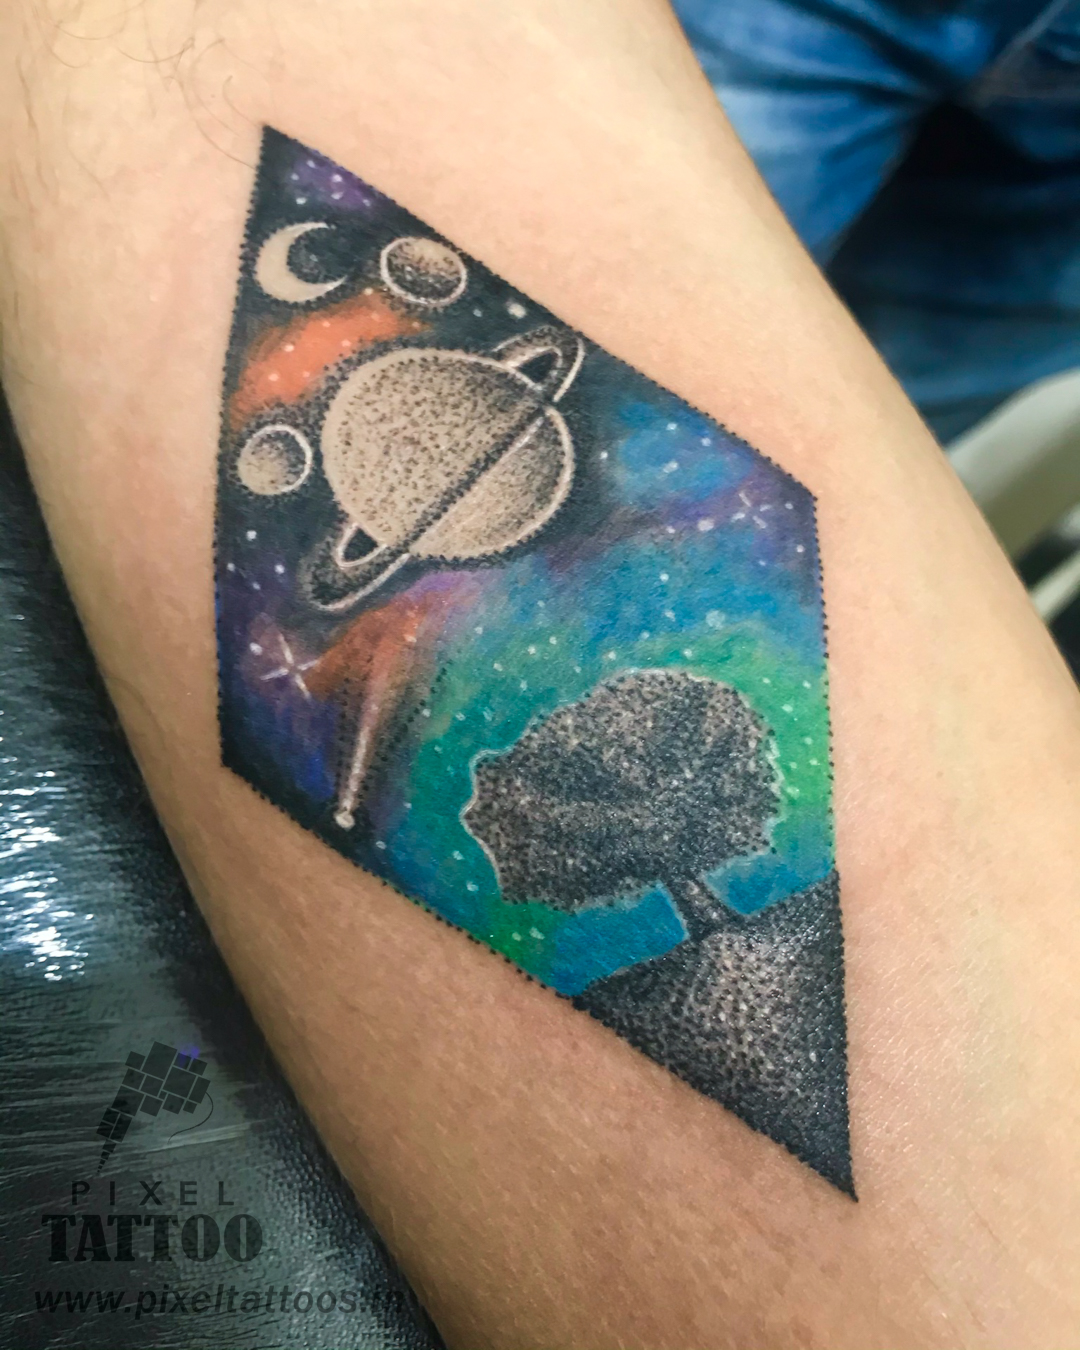 Single needle astronomy inspired tattoo located on the